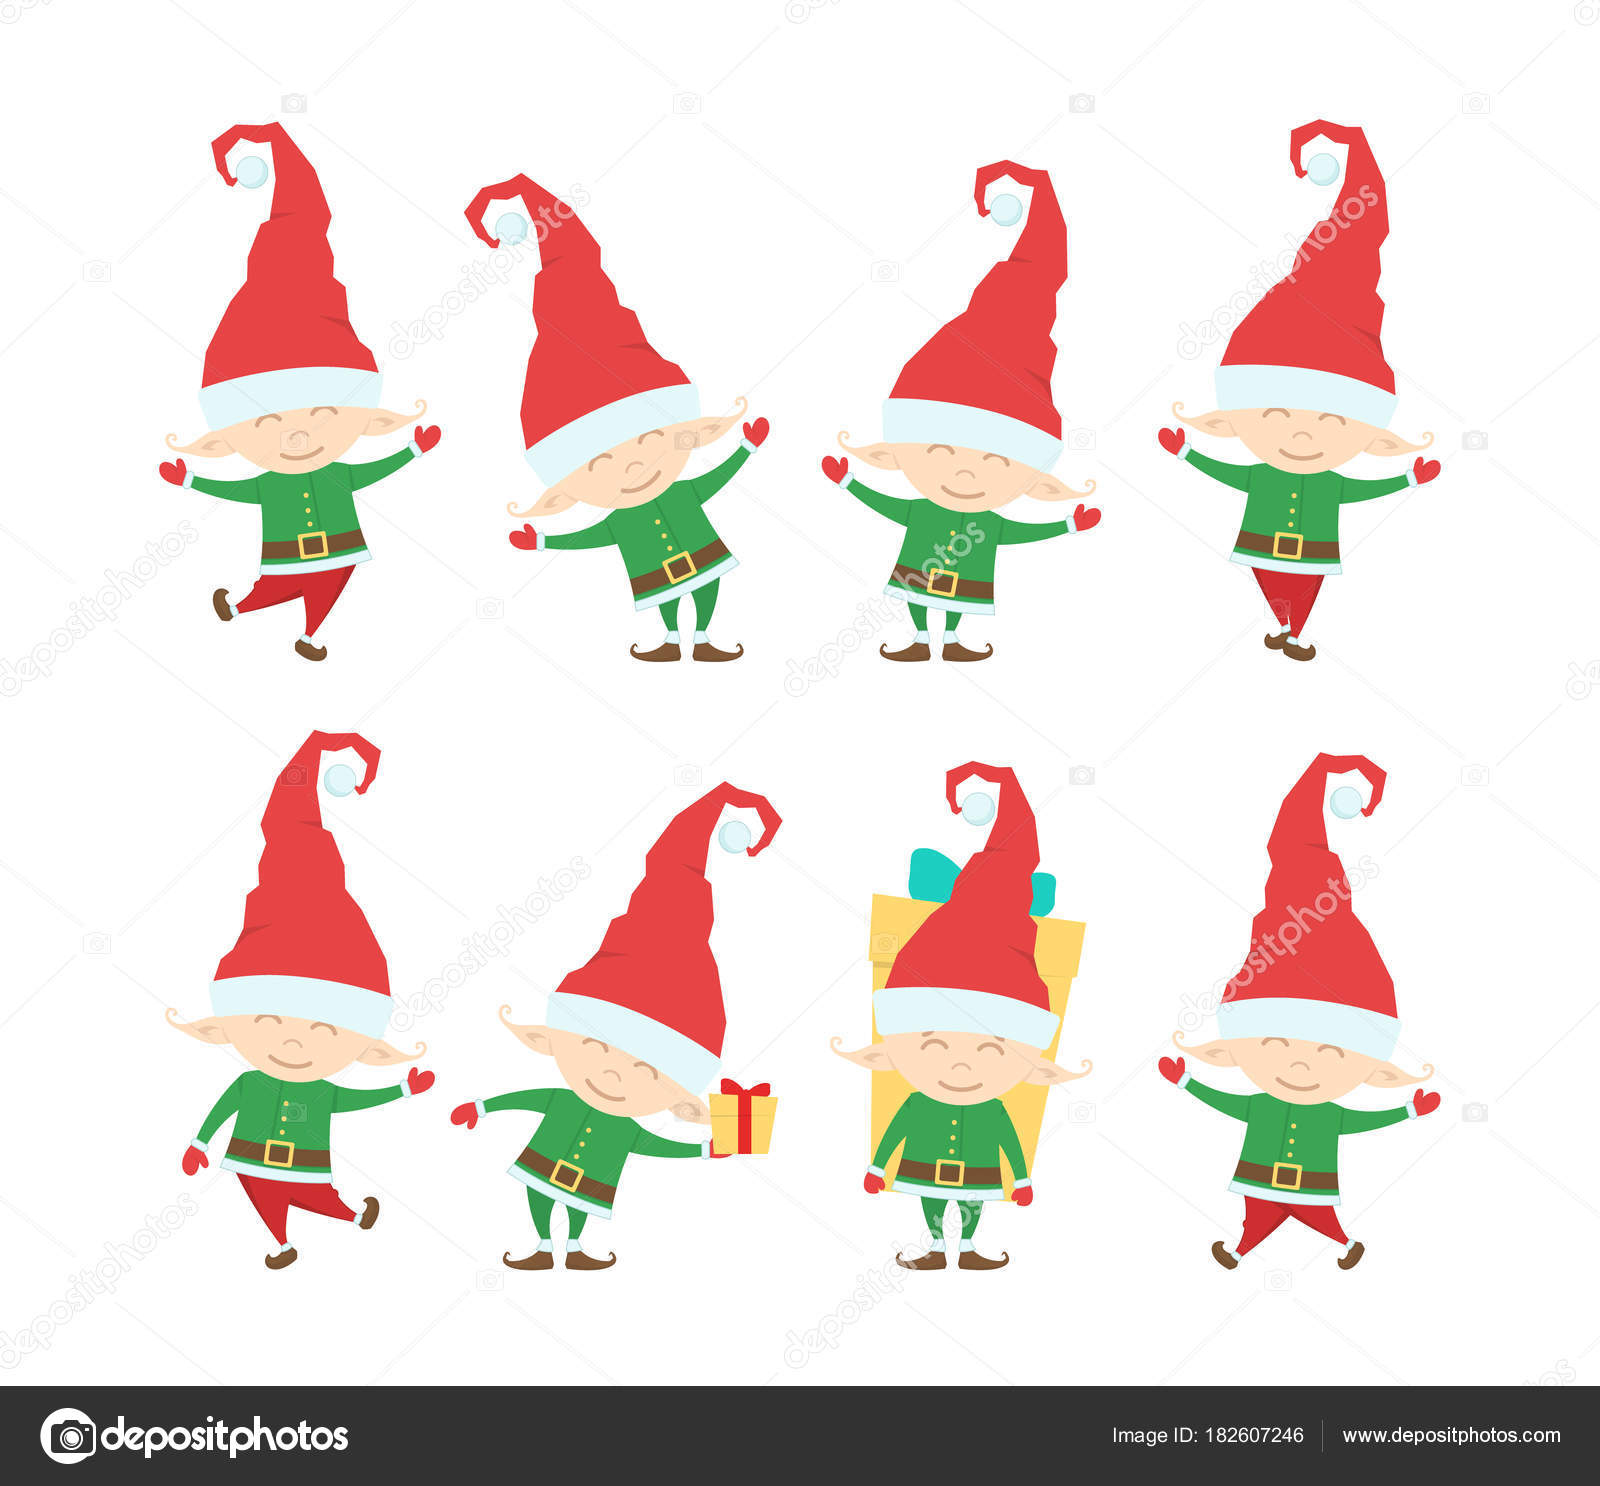 Set Of Funny Christmas Santa Claus Elf Cartoon Characters Isolated On White Background Stock Vector C Deniskrivoy Photo Gmail Com 182607246